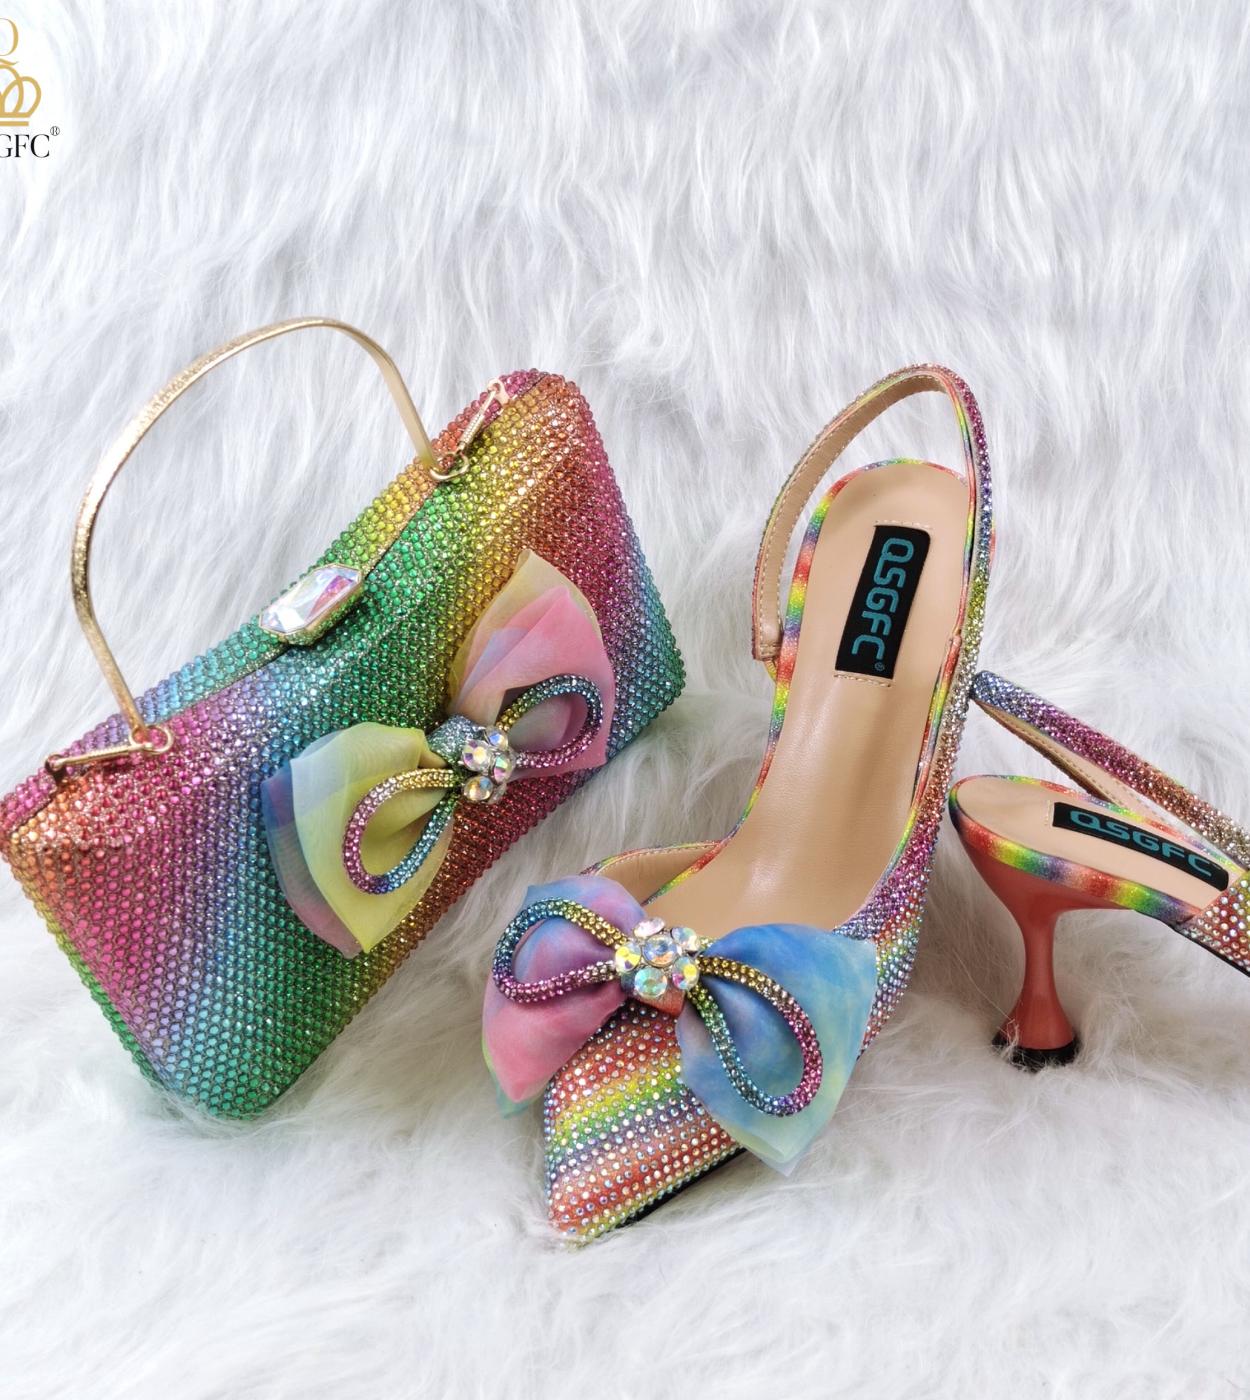 Qsgfc 2022 New Arrival Rainbow Color Shoes And Bag With Full Diamond Butterfly Accessories For Party Wedding  Pumps